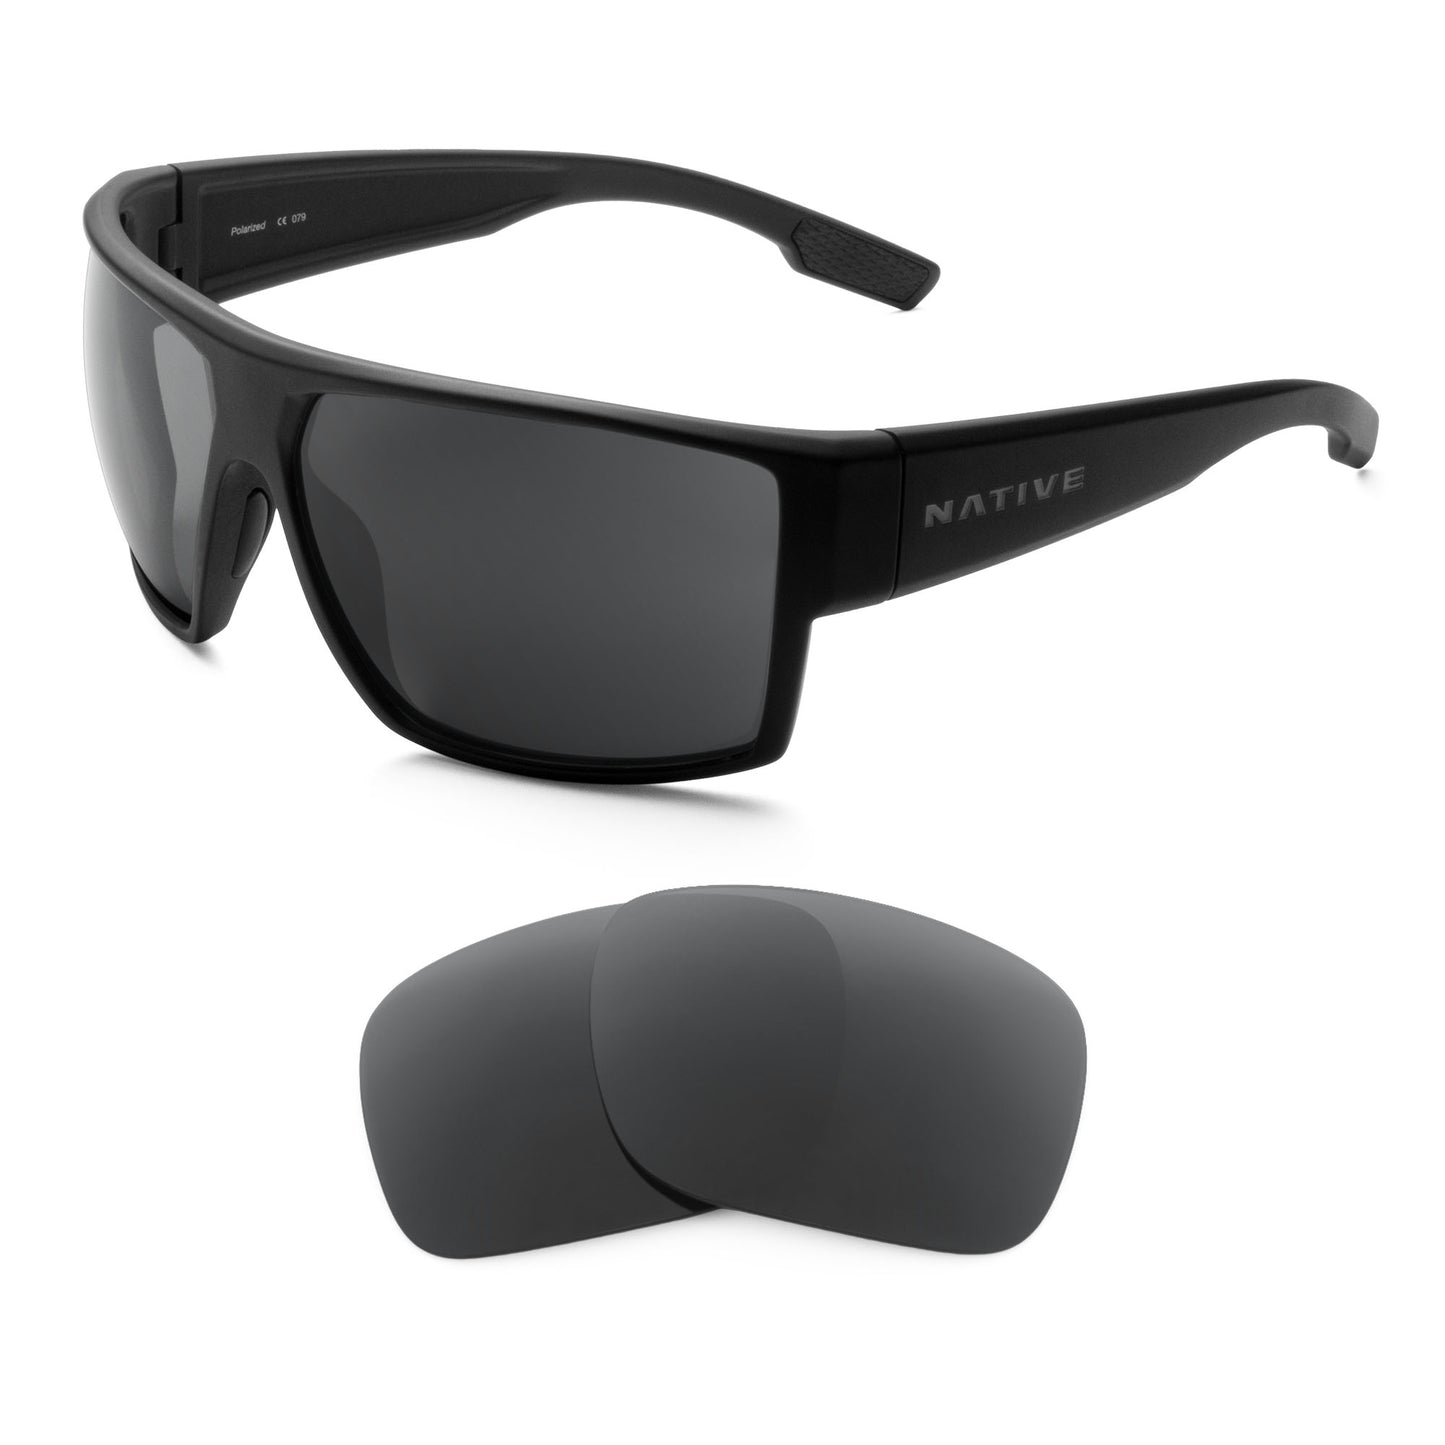 Native Freerider sunglasses with replacement lenses